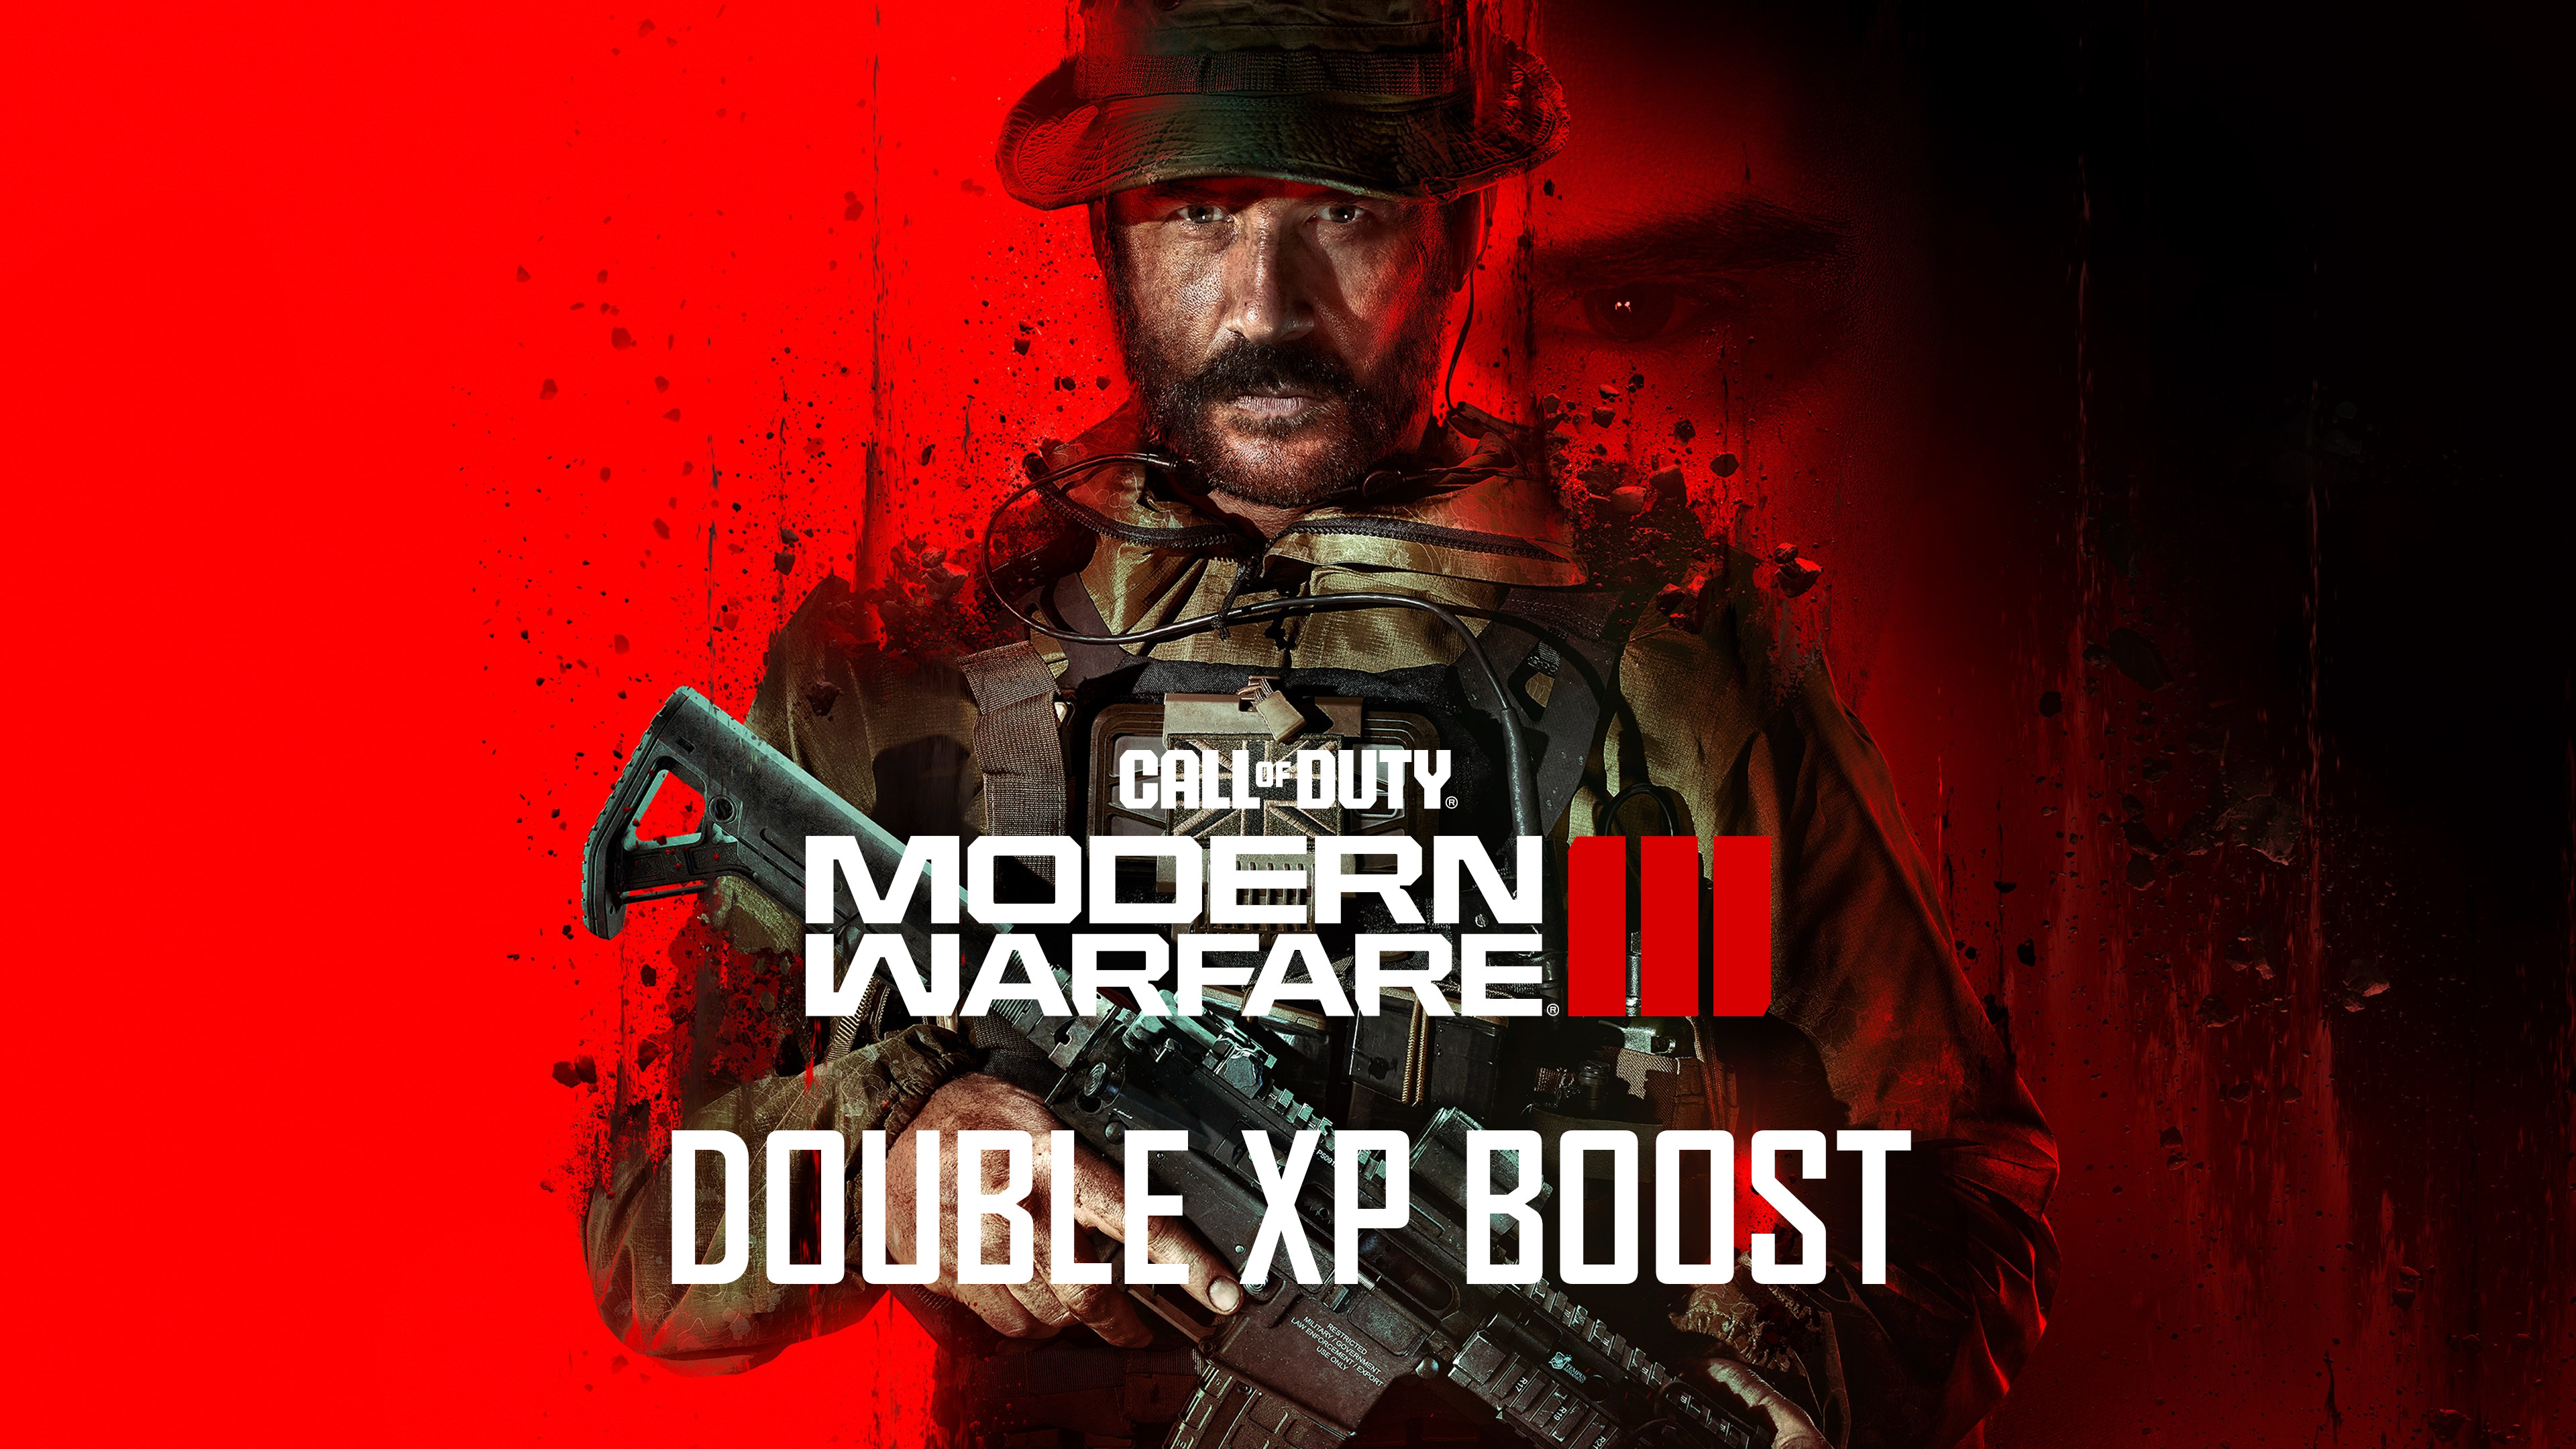 Call of Duty: Modern Warfare III - 5 Hours Double XP Boost PC/PS4/PS5/XBOX One/Series X|S CD Key 4.52$